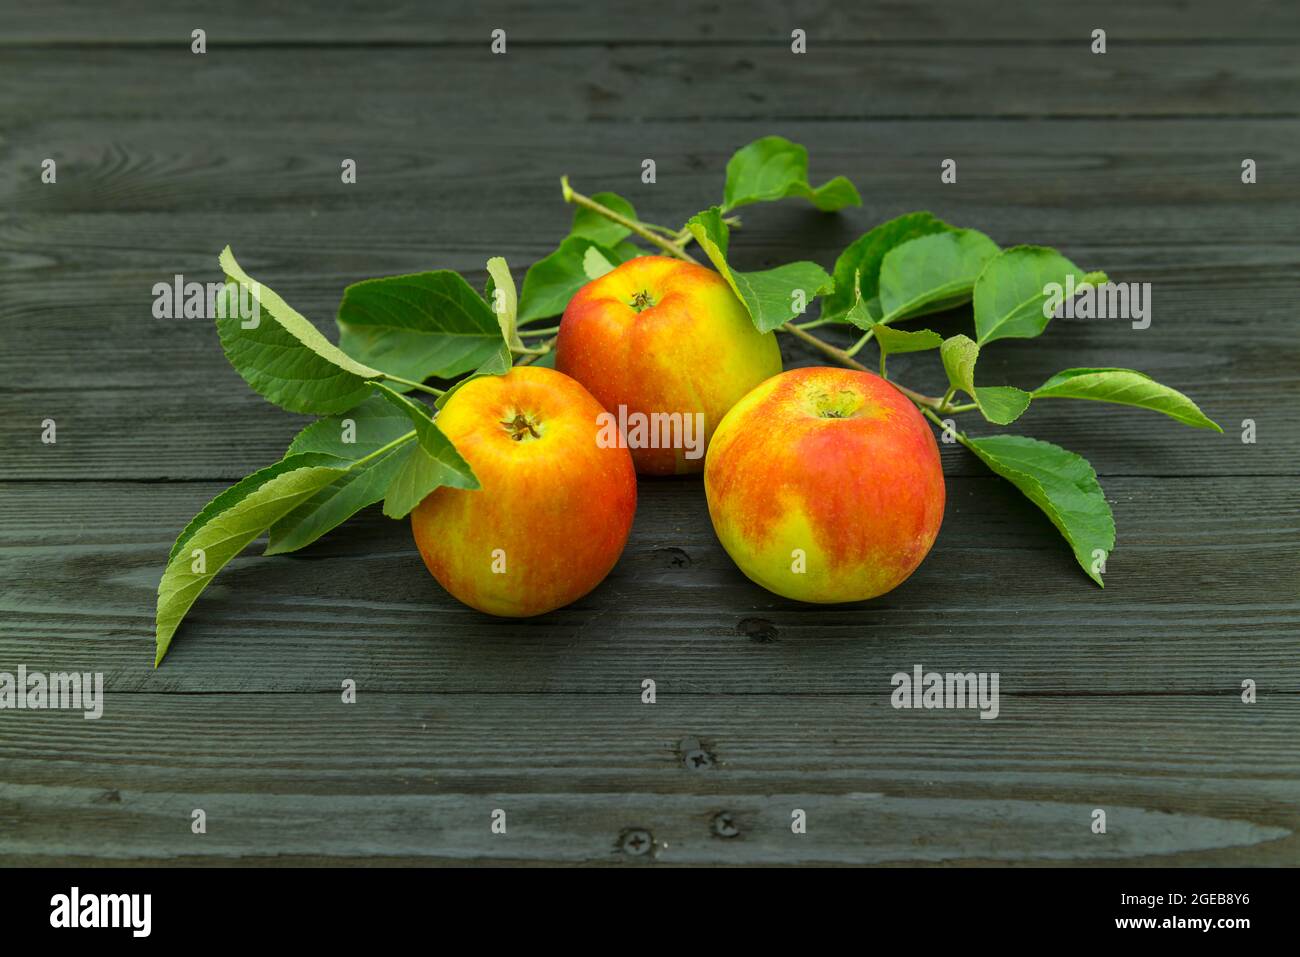 Apples placed on a black wooden substrate. The fruits are decorated with green leaves .. Stock Photo